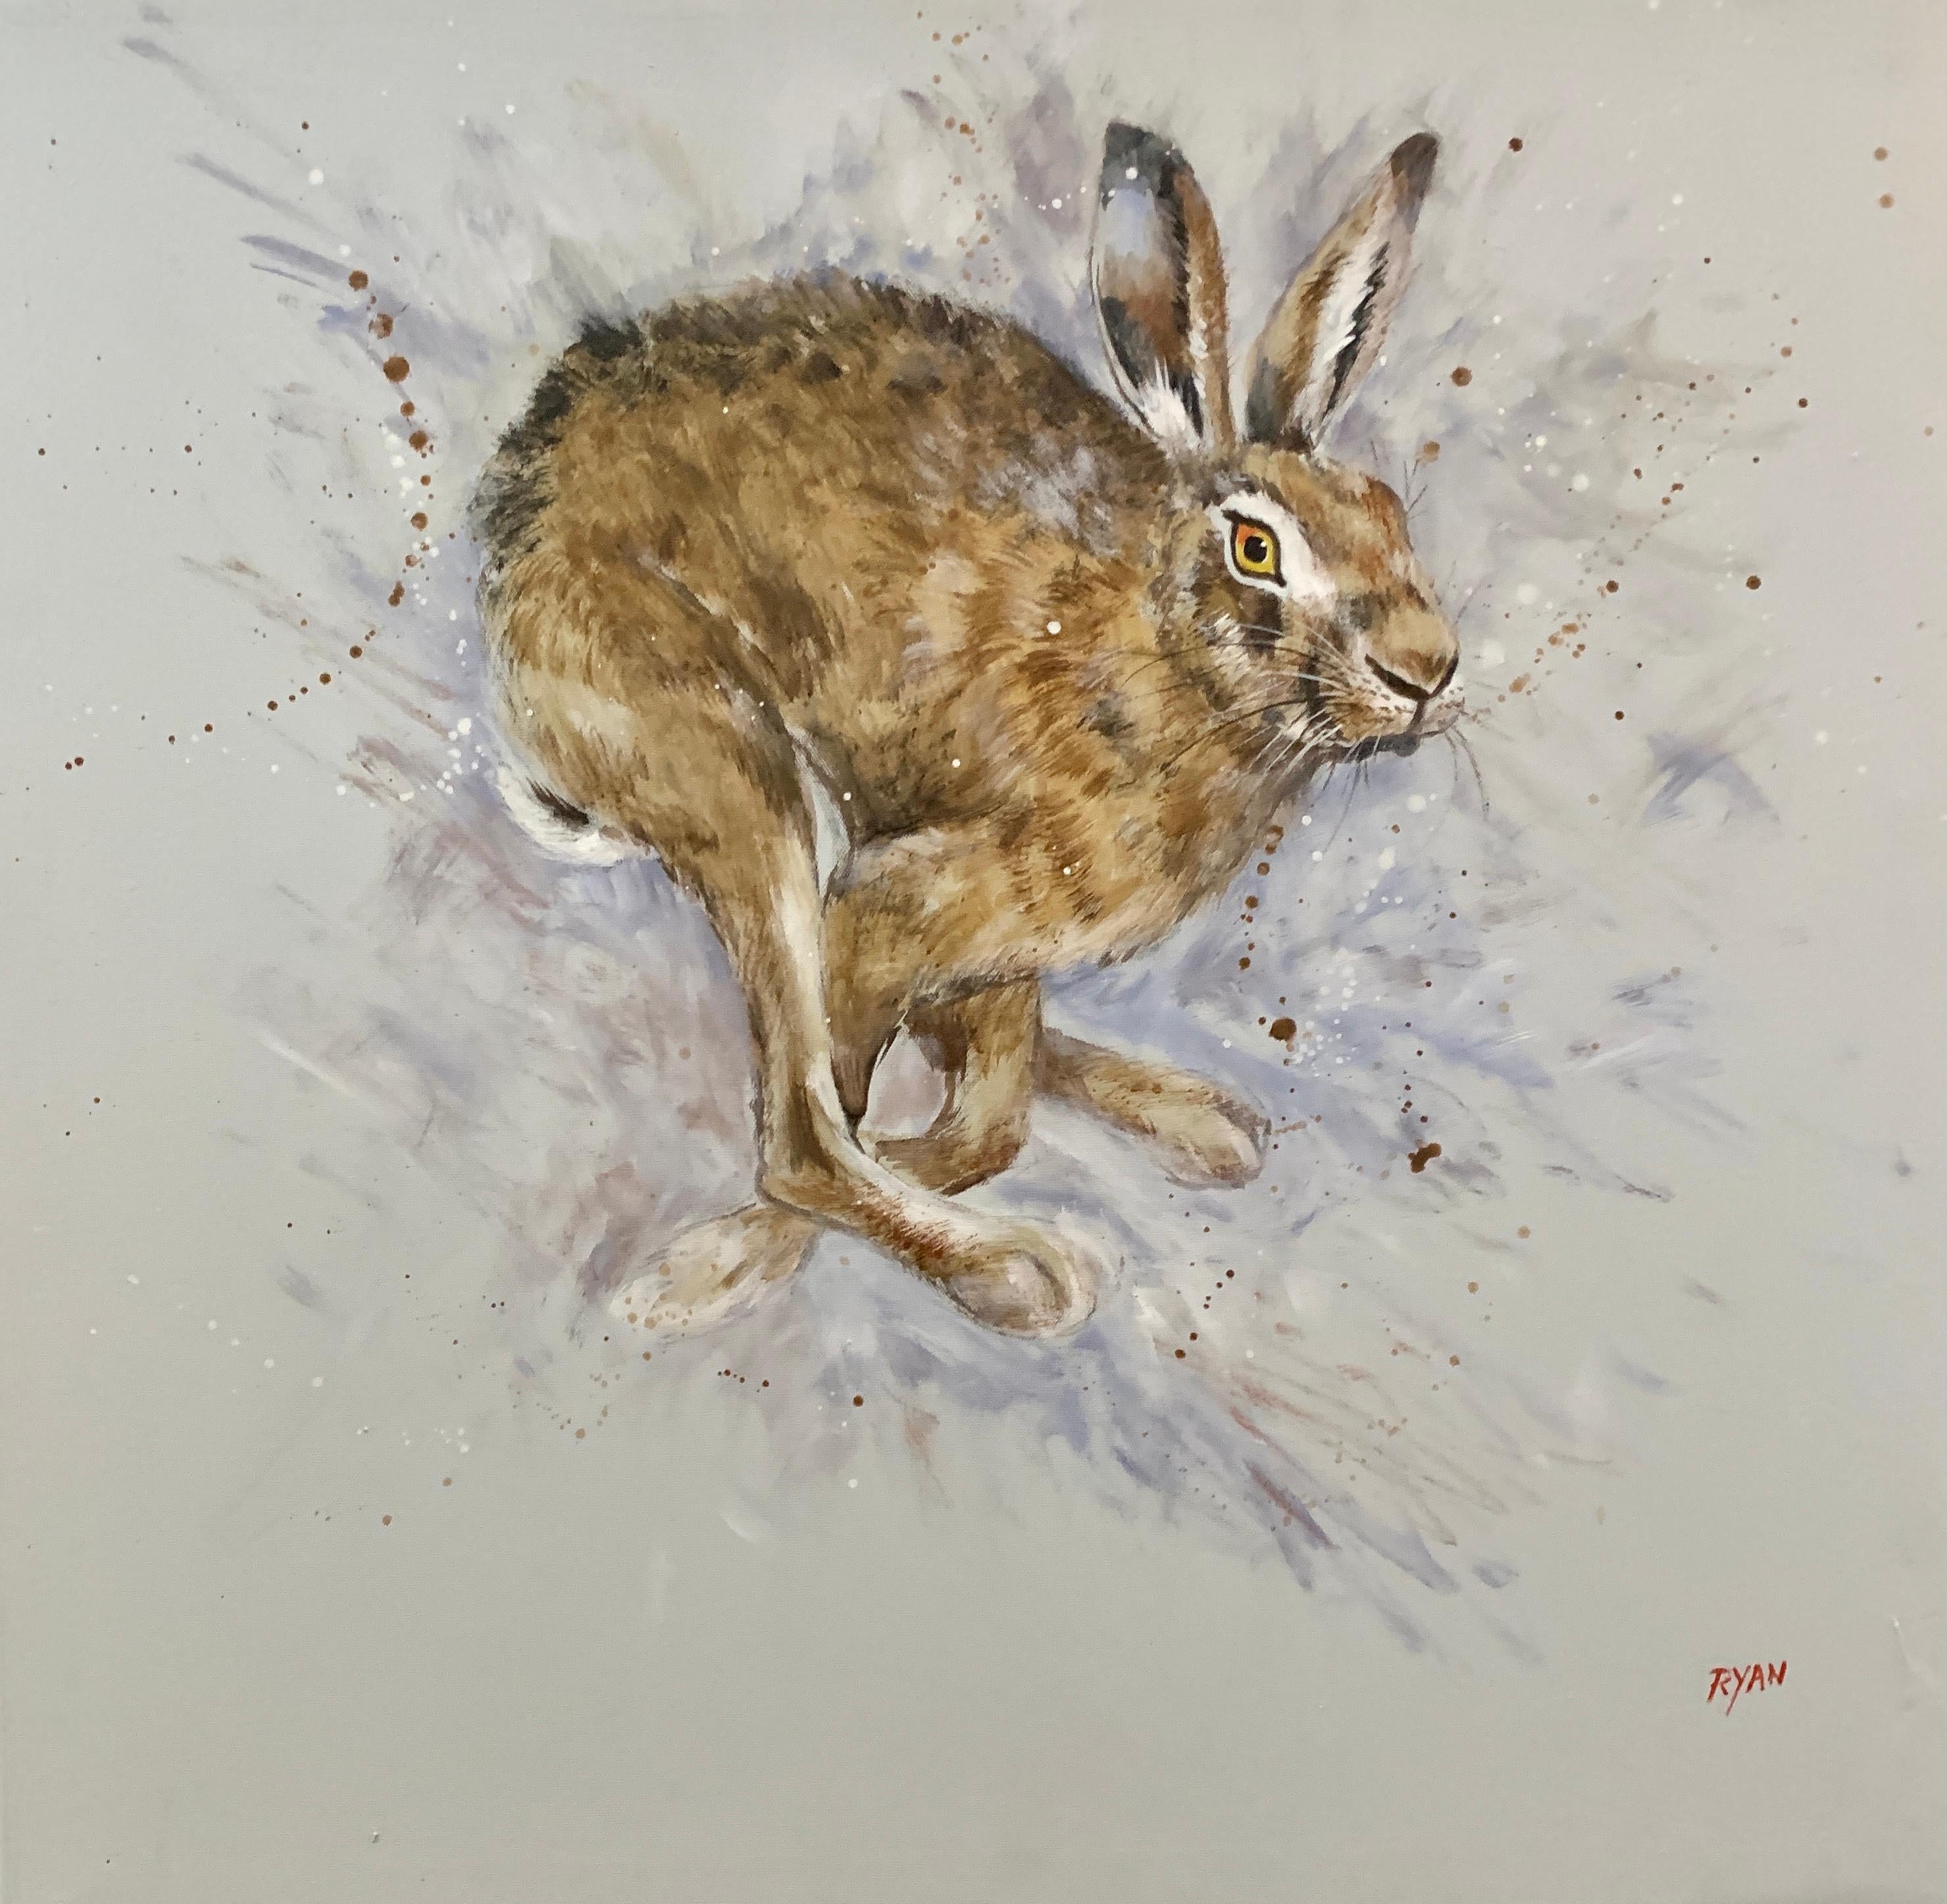 20th century English, fun oil on canvas portrait of a running or jumping Hare